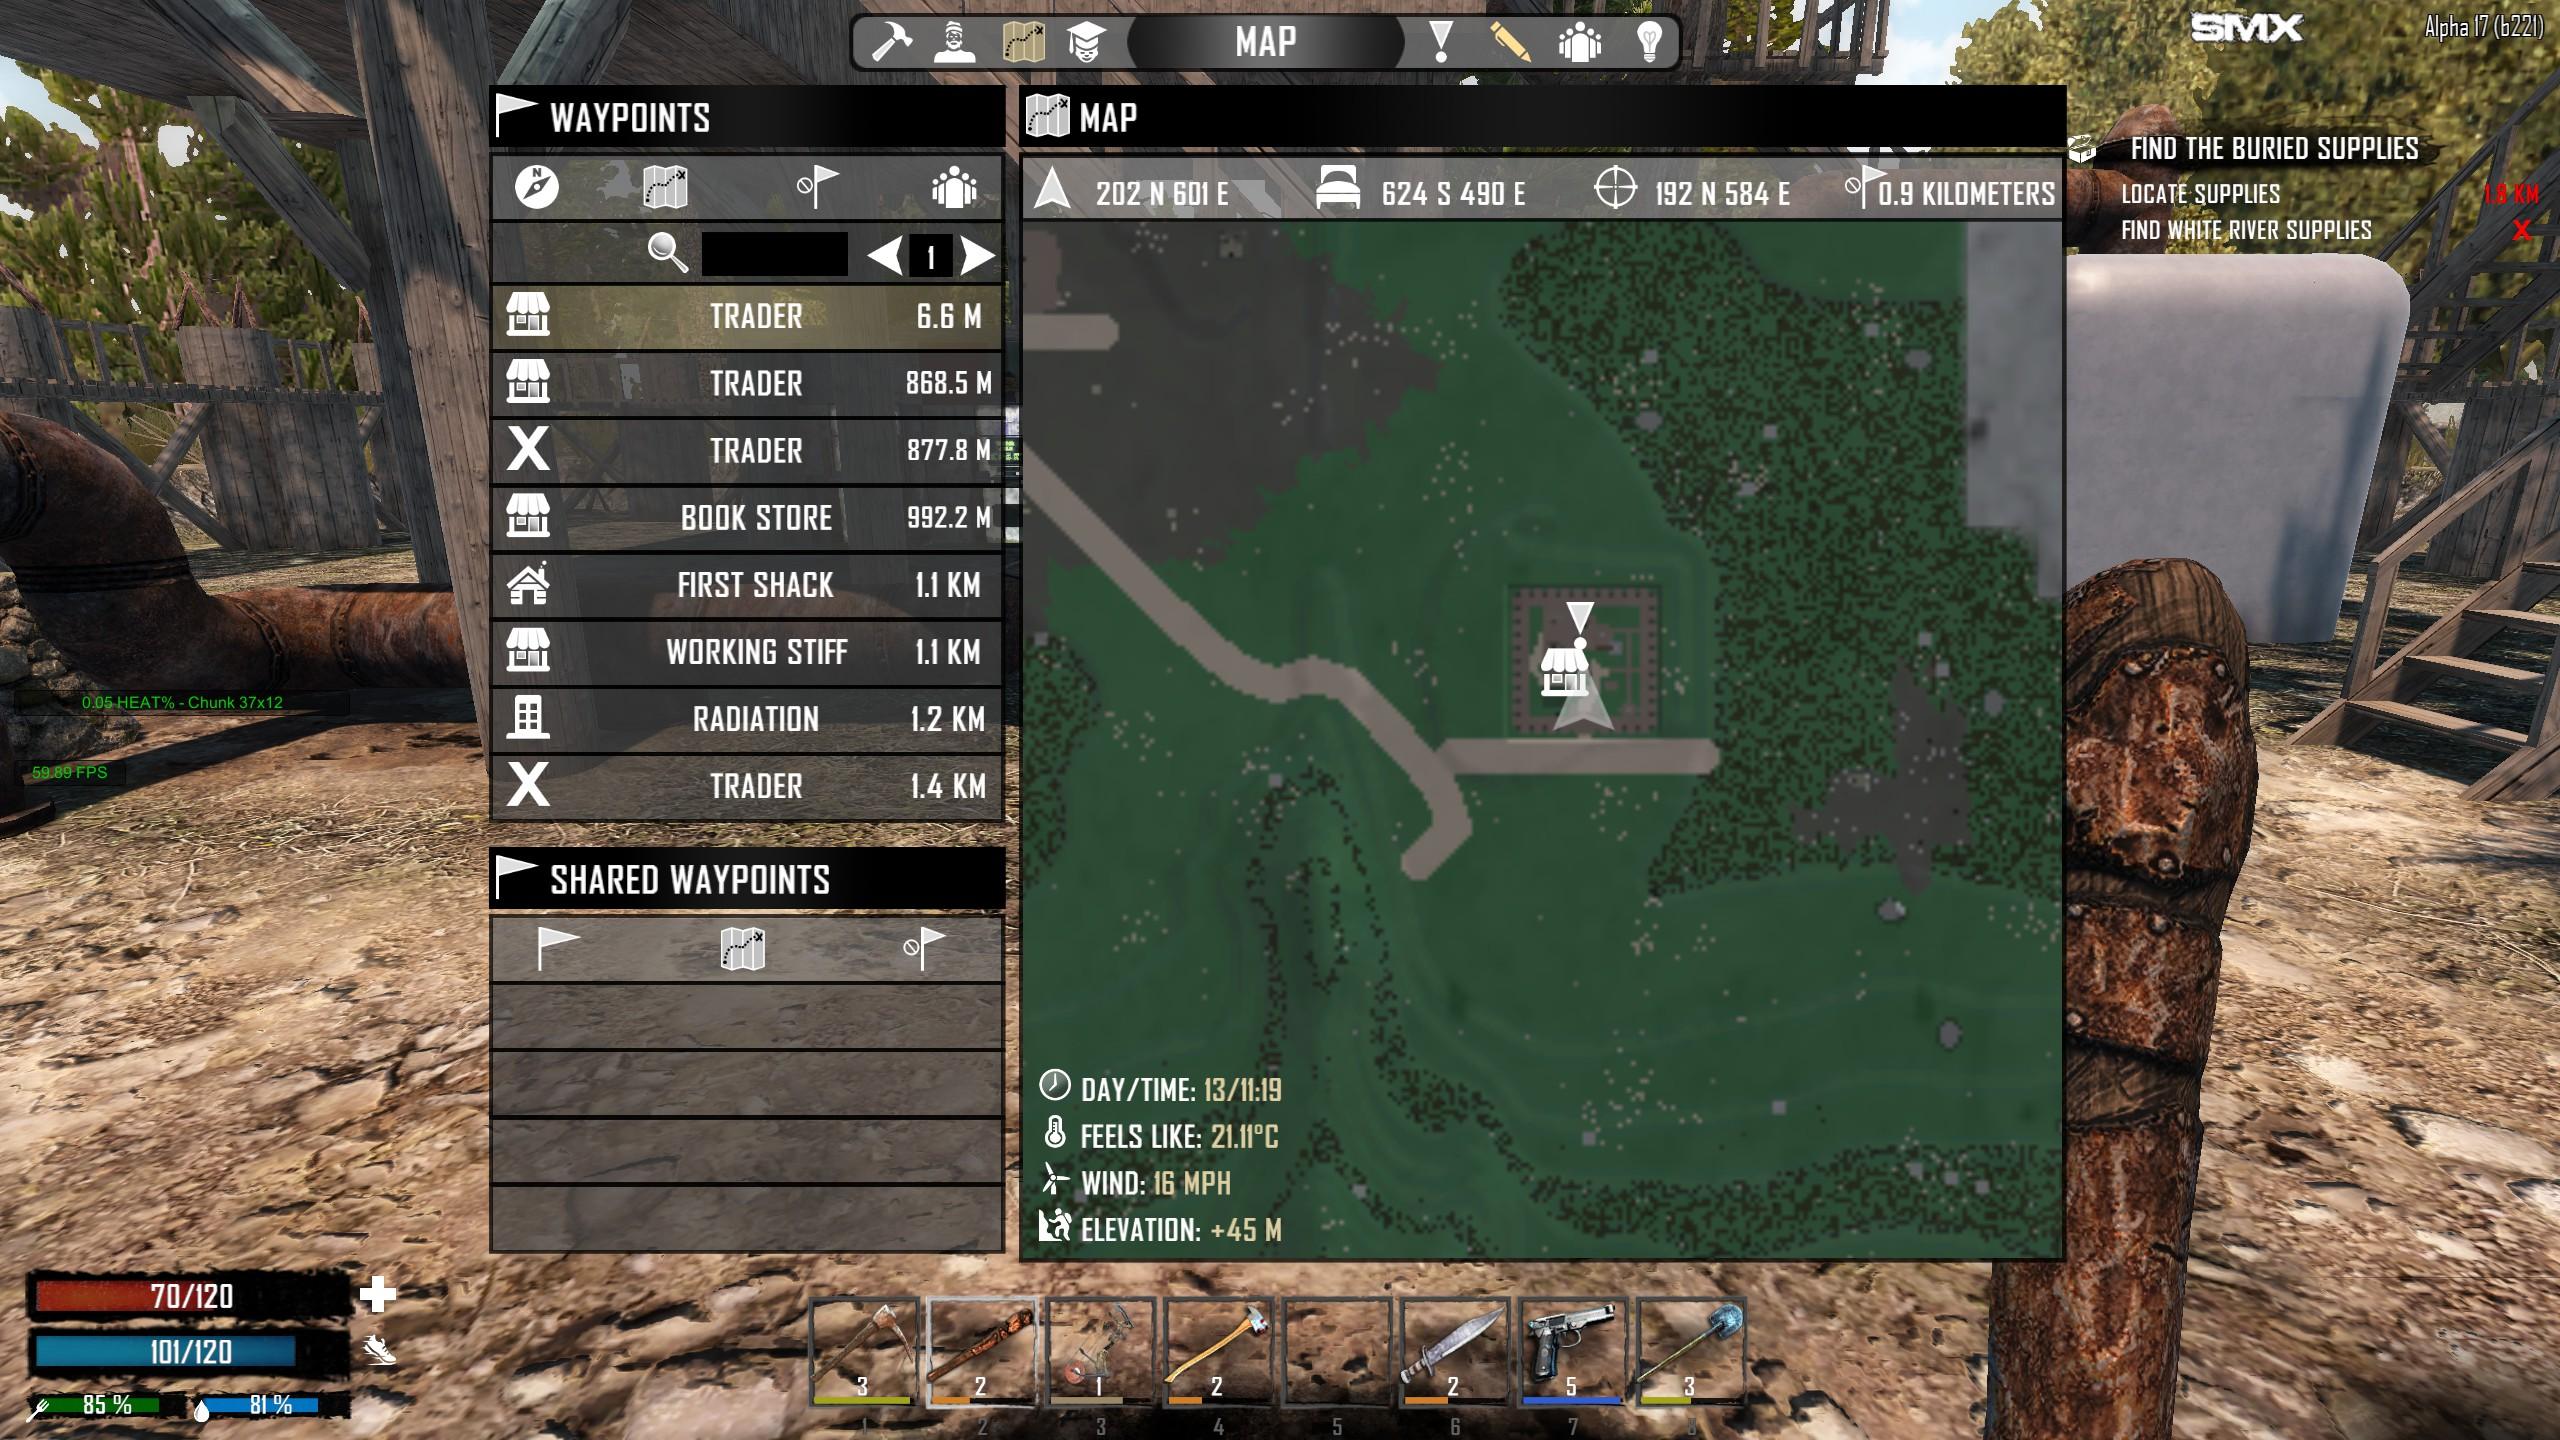 7 days to die map traders location